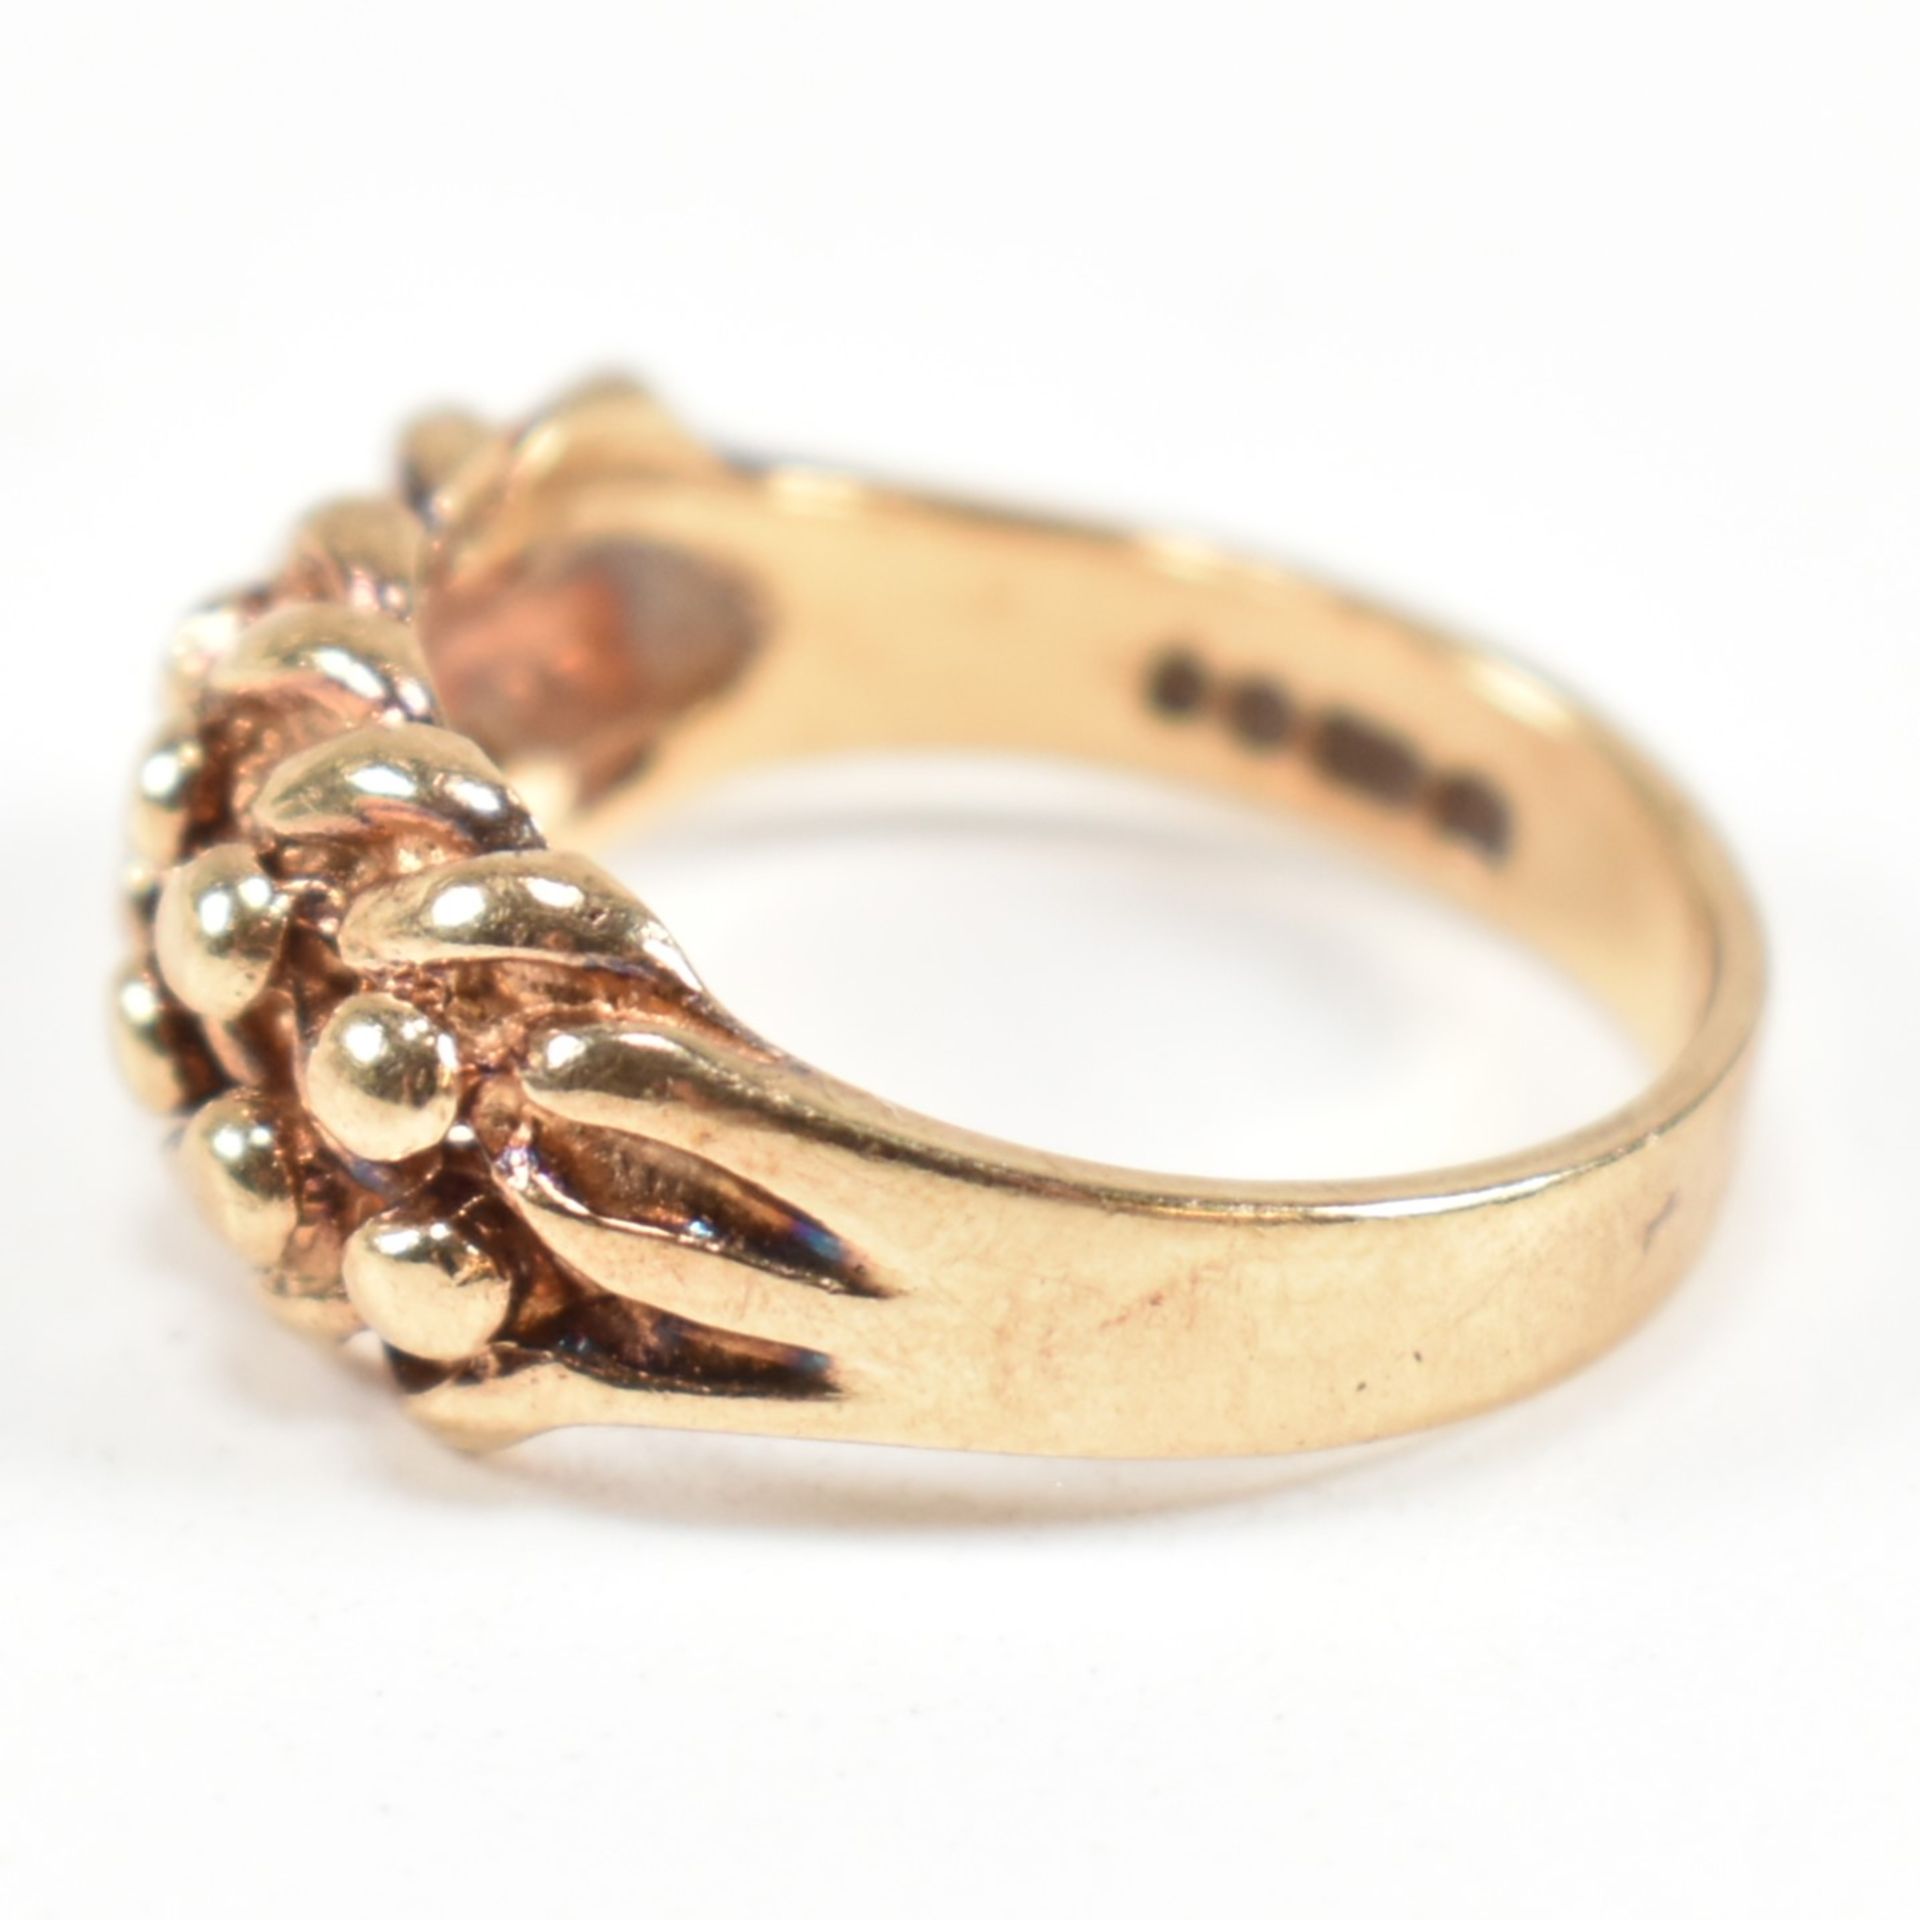 HALLMARKED 9CT GOLD KEEPER RING - Image 10 of 10